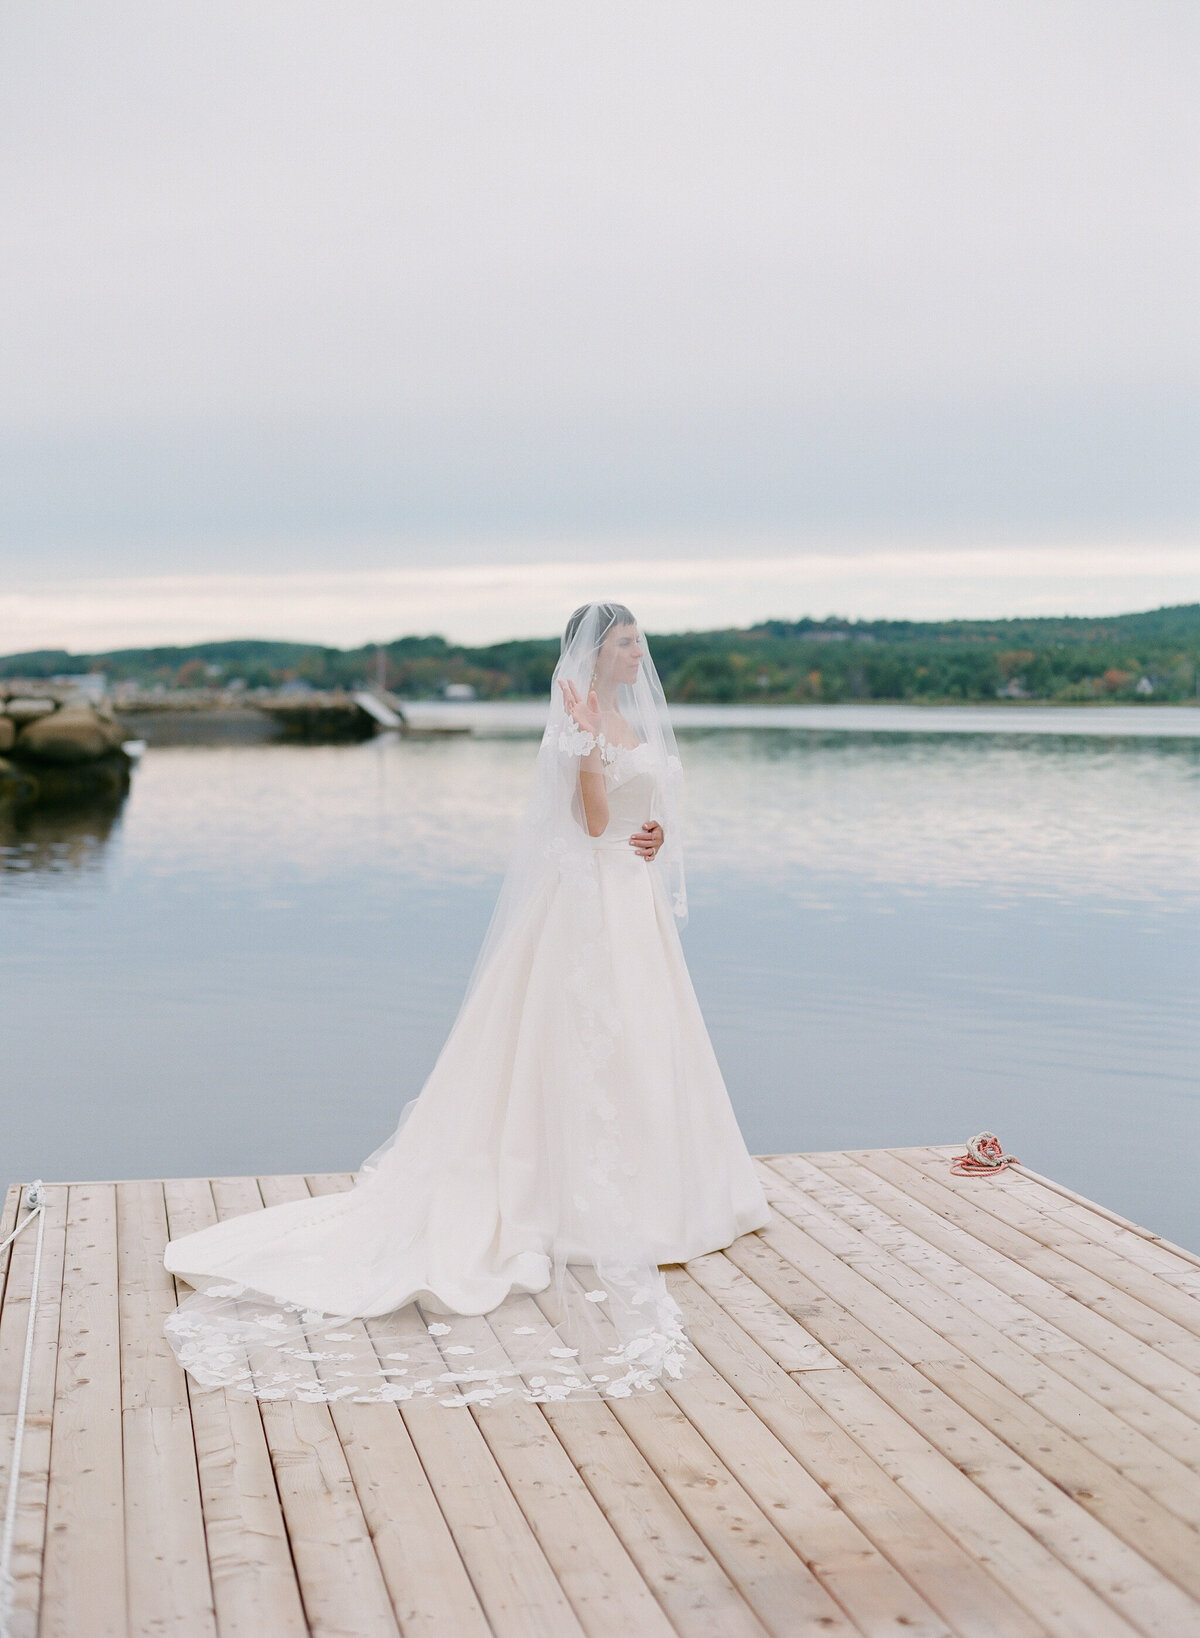 Jacqueline Anne Photography - Halifax Wedding Photographer - Lizzie and Miles-67